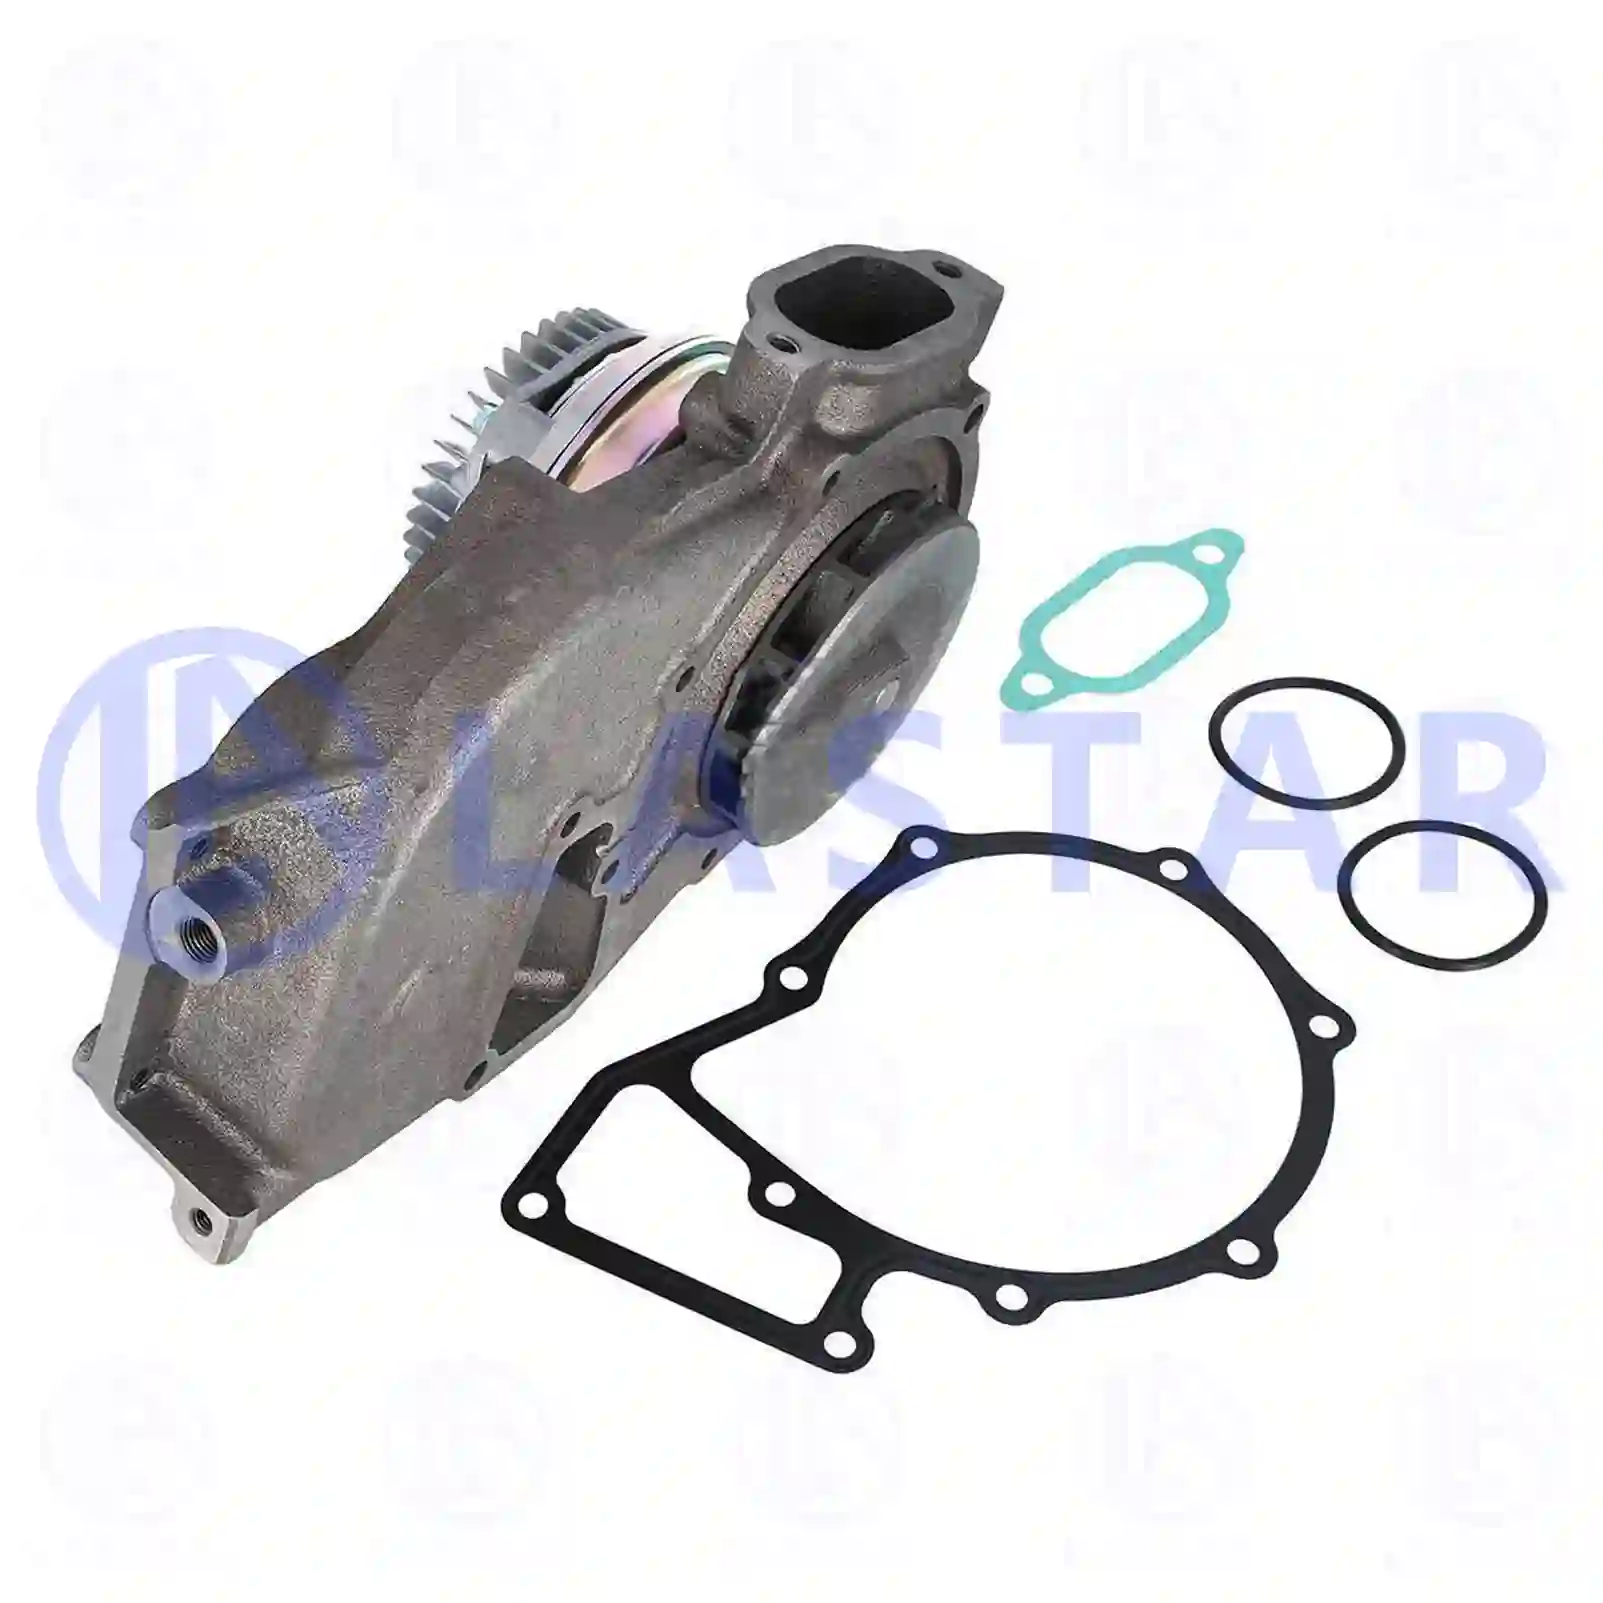 Water pump, with electromagnetic clutch, 77708145, 5412001801, 5412002701, ZG00767-0008 ||  77708145 Lastar Spare Part | Truck Spare Parts, Auotomotive Spare Parts Water pump, with electromagnetic clutch, 77708145, 5412001801, 5412002701, ZG00767-0008 ||  77708145 Lastar Spare Part | Truck Spare Parts, Auotomotive Spare Parts